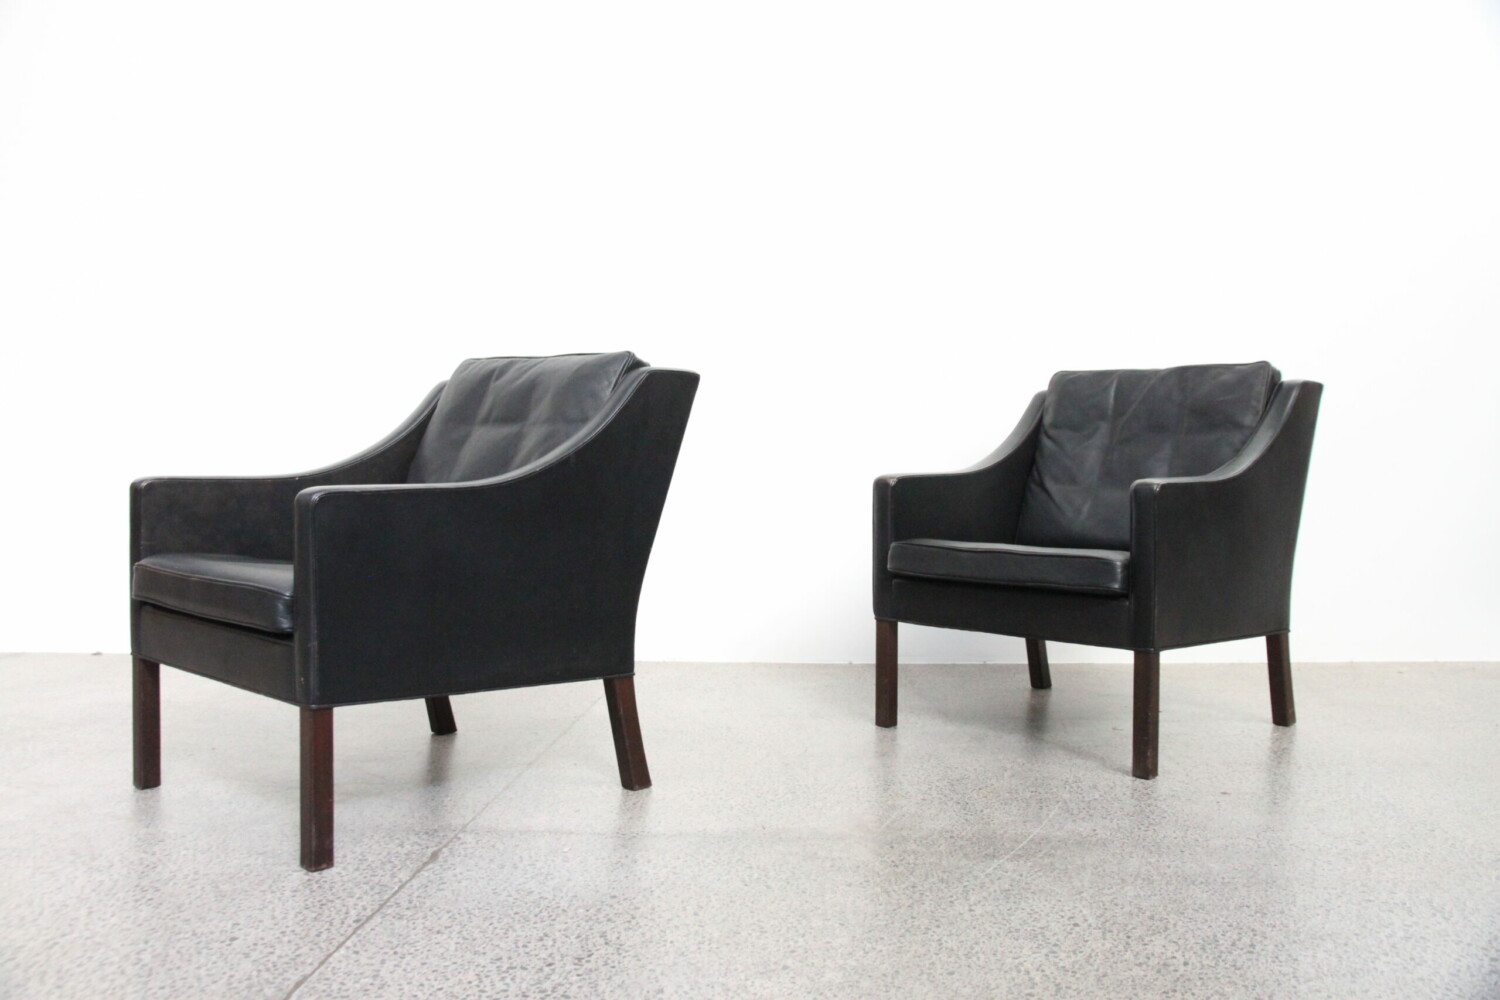 Pair of Leather Armchairs by Borge Mogensen sold